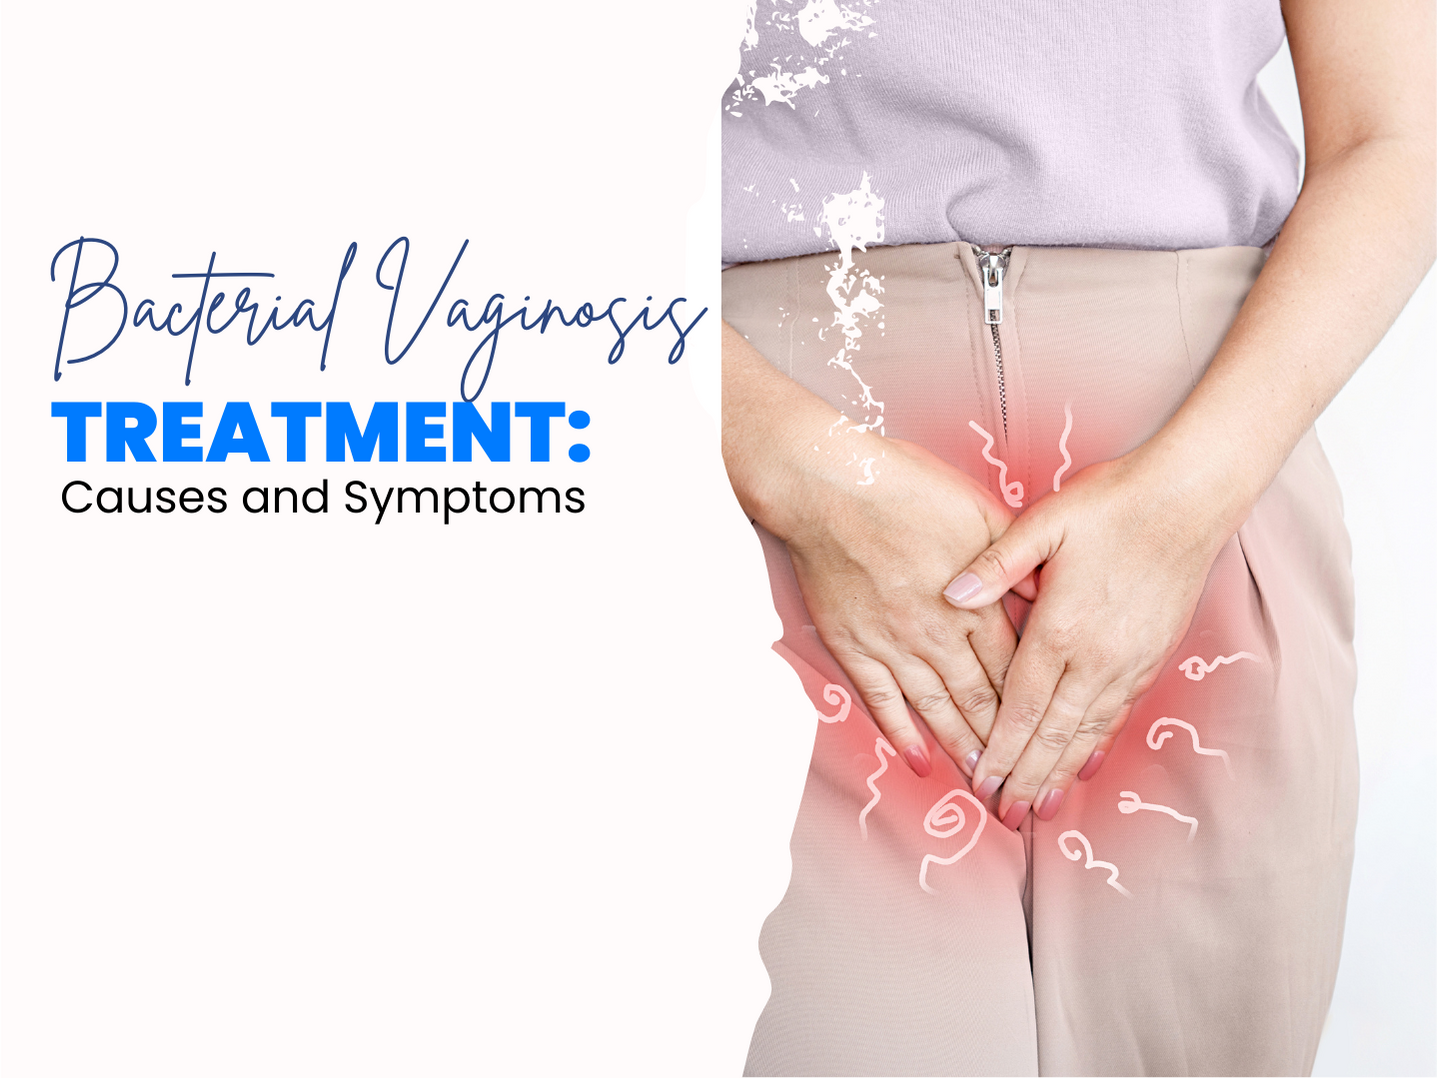 Bacterial Vaginosis Treatment: Causes and Symptoms